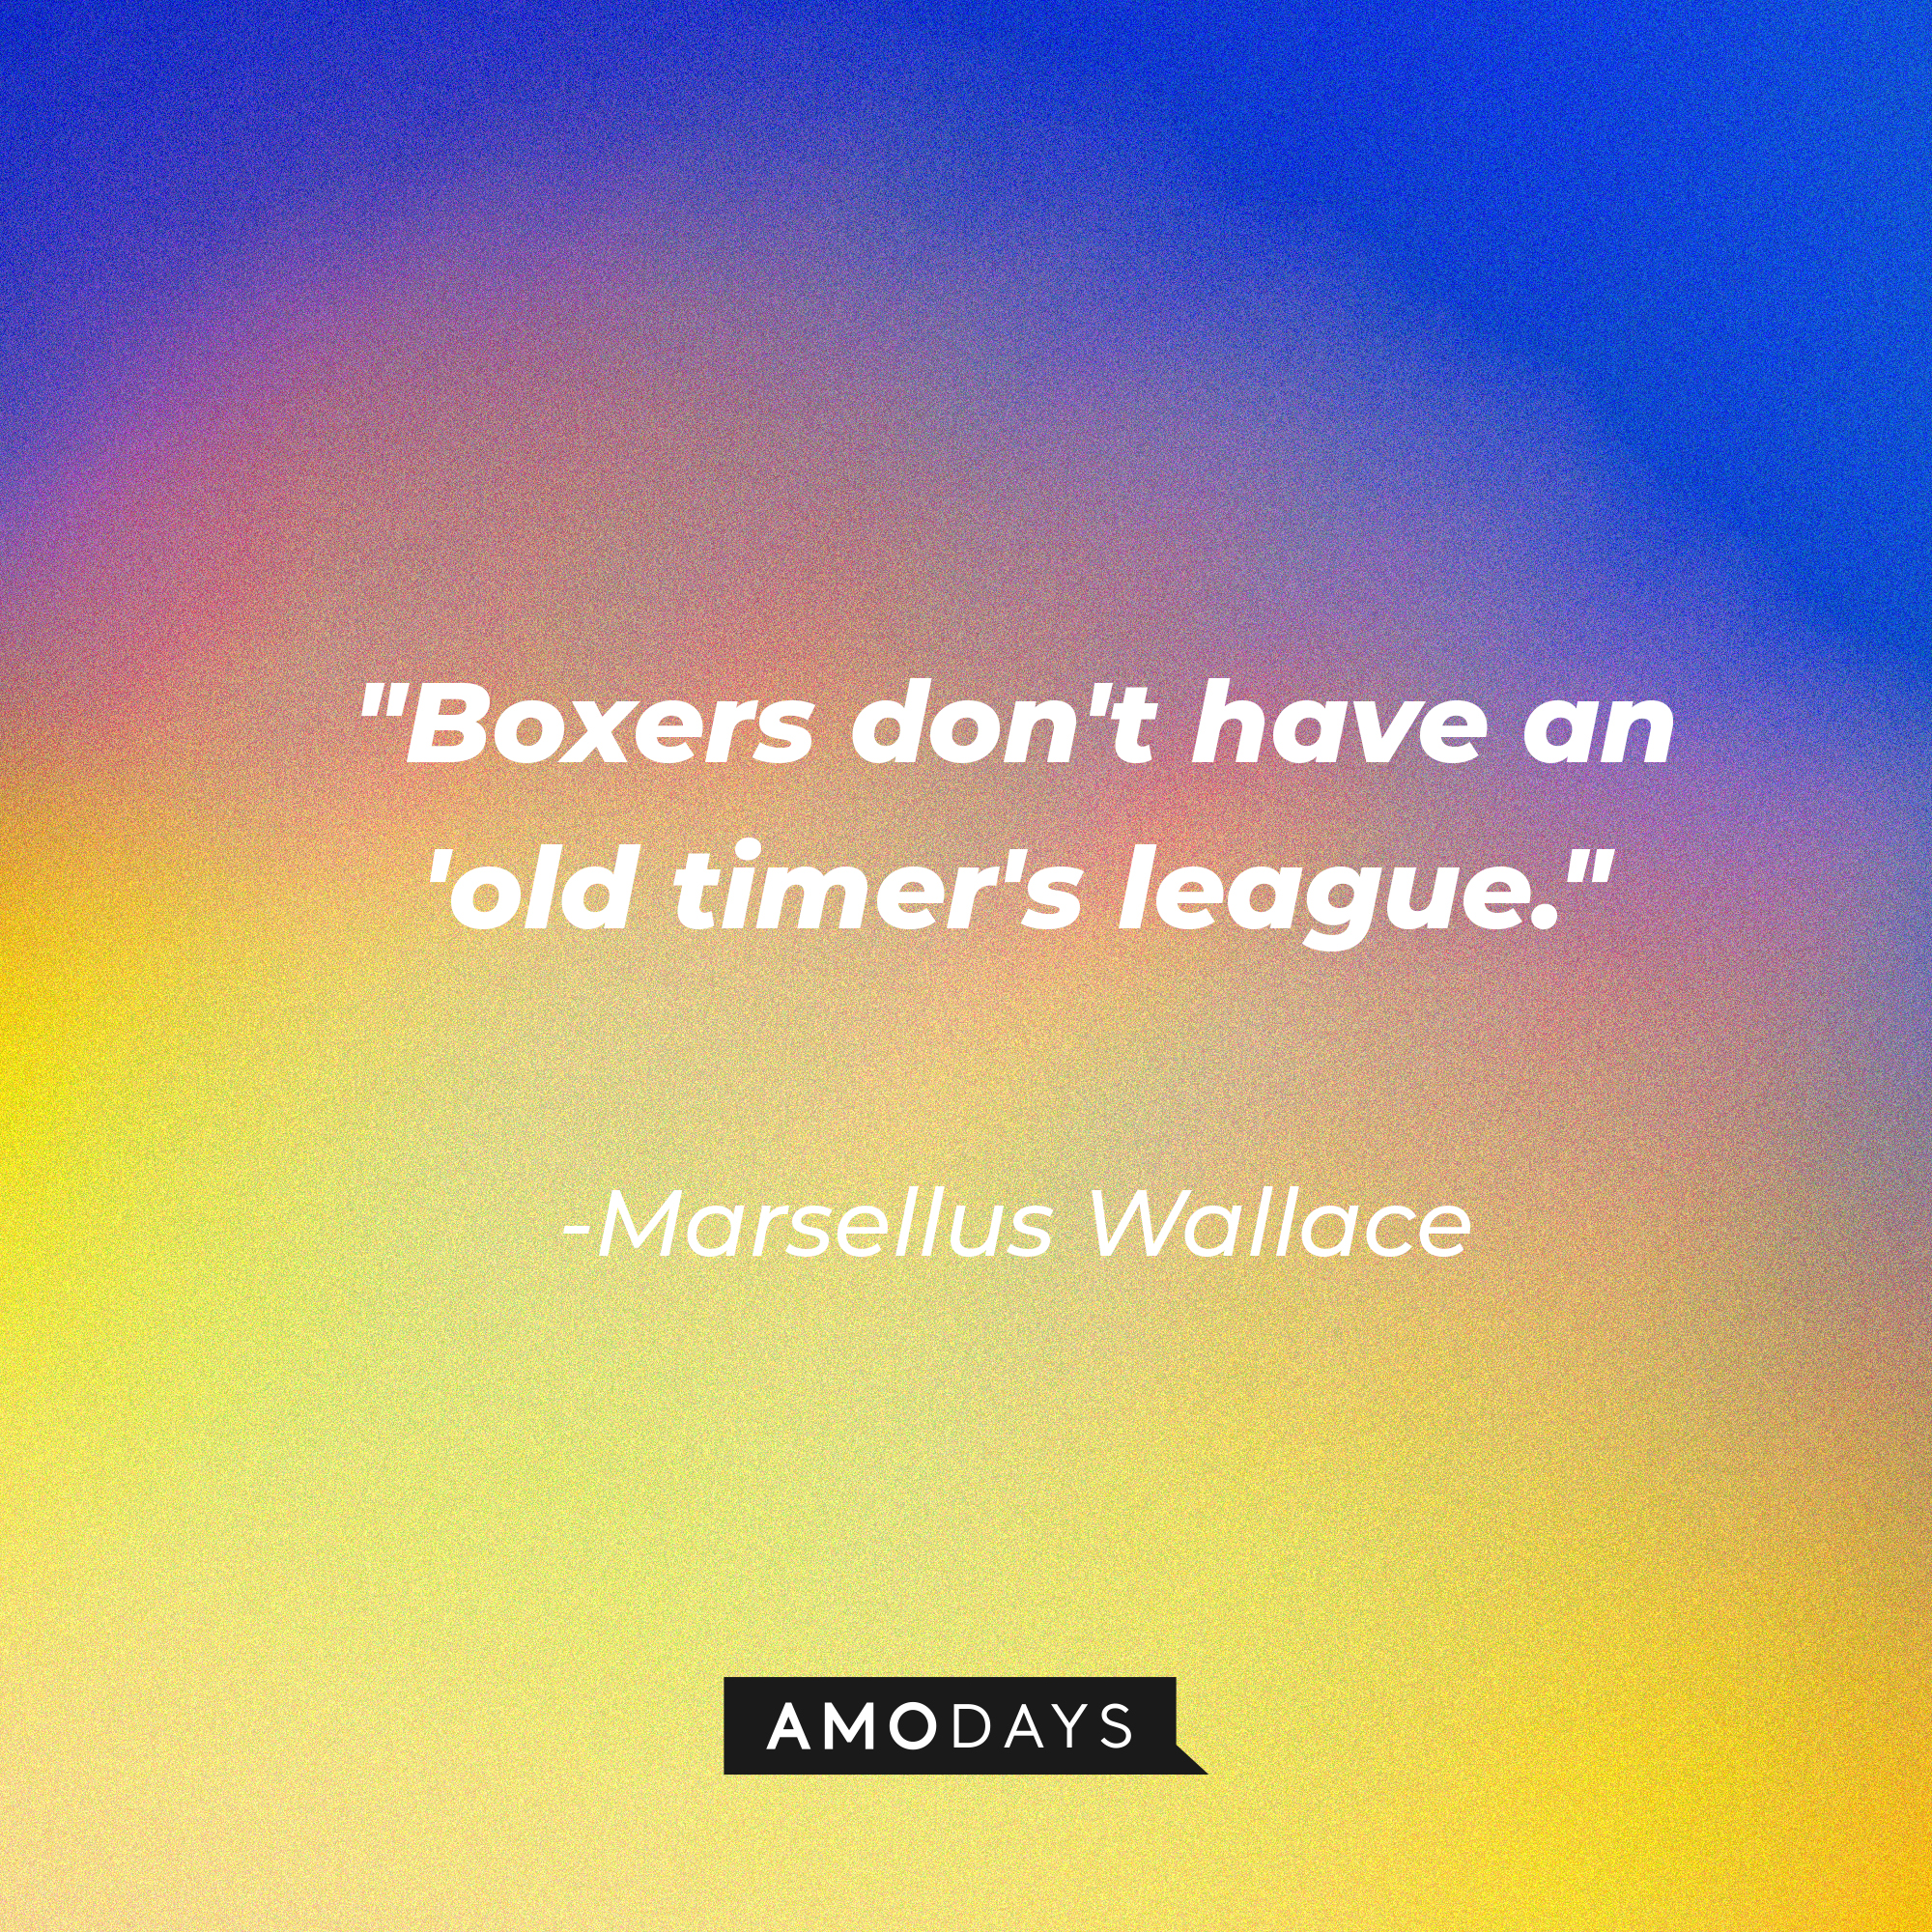 Marsellus Wallace's quote: "Boxers don't have an 'old timer's league." | Source: AmoDays